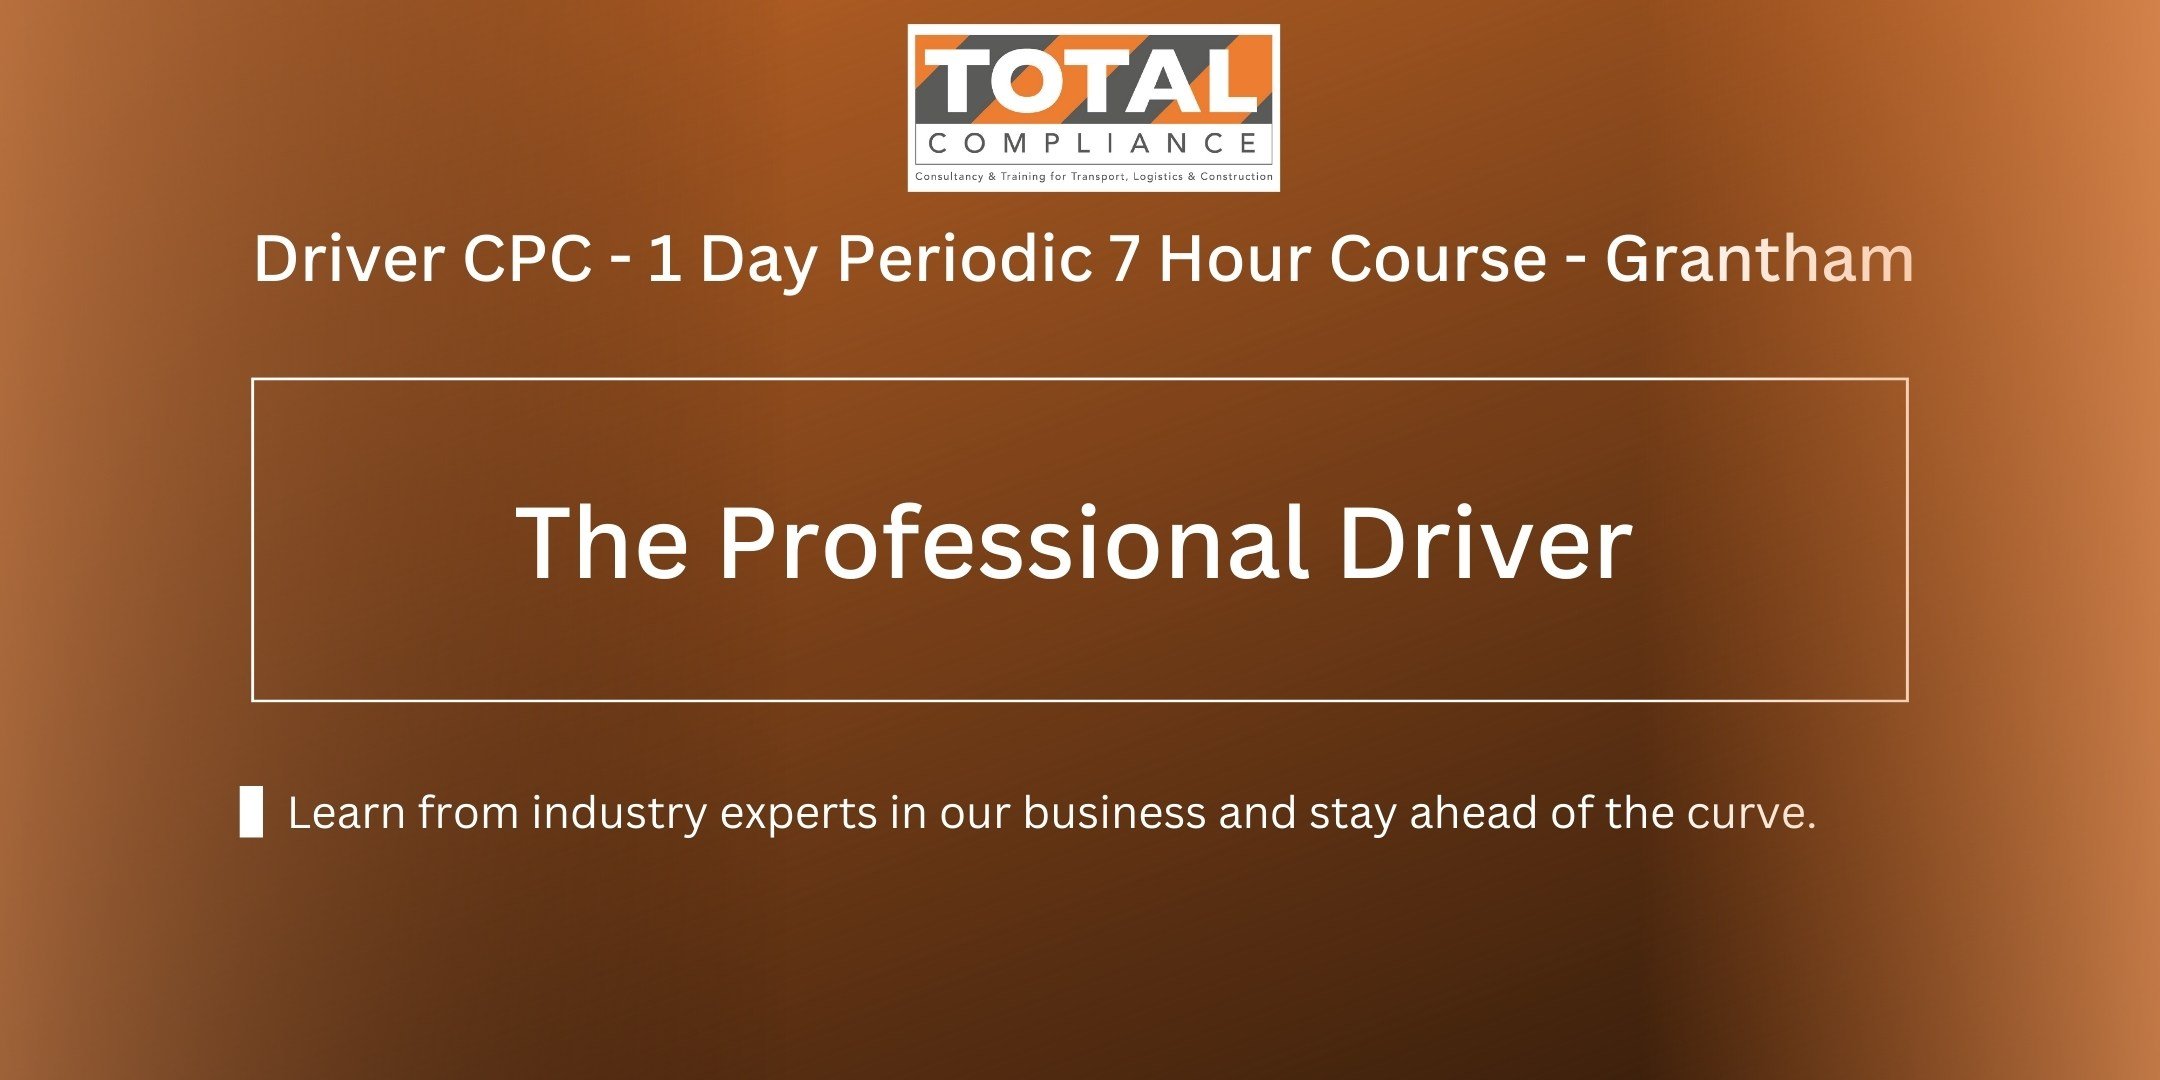 Driver CPC - 1 Day Periodic 7 Hour Course/The Professional Driver - Birmingham 